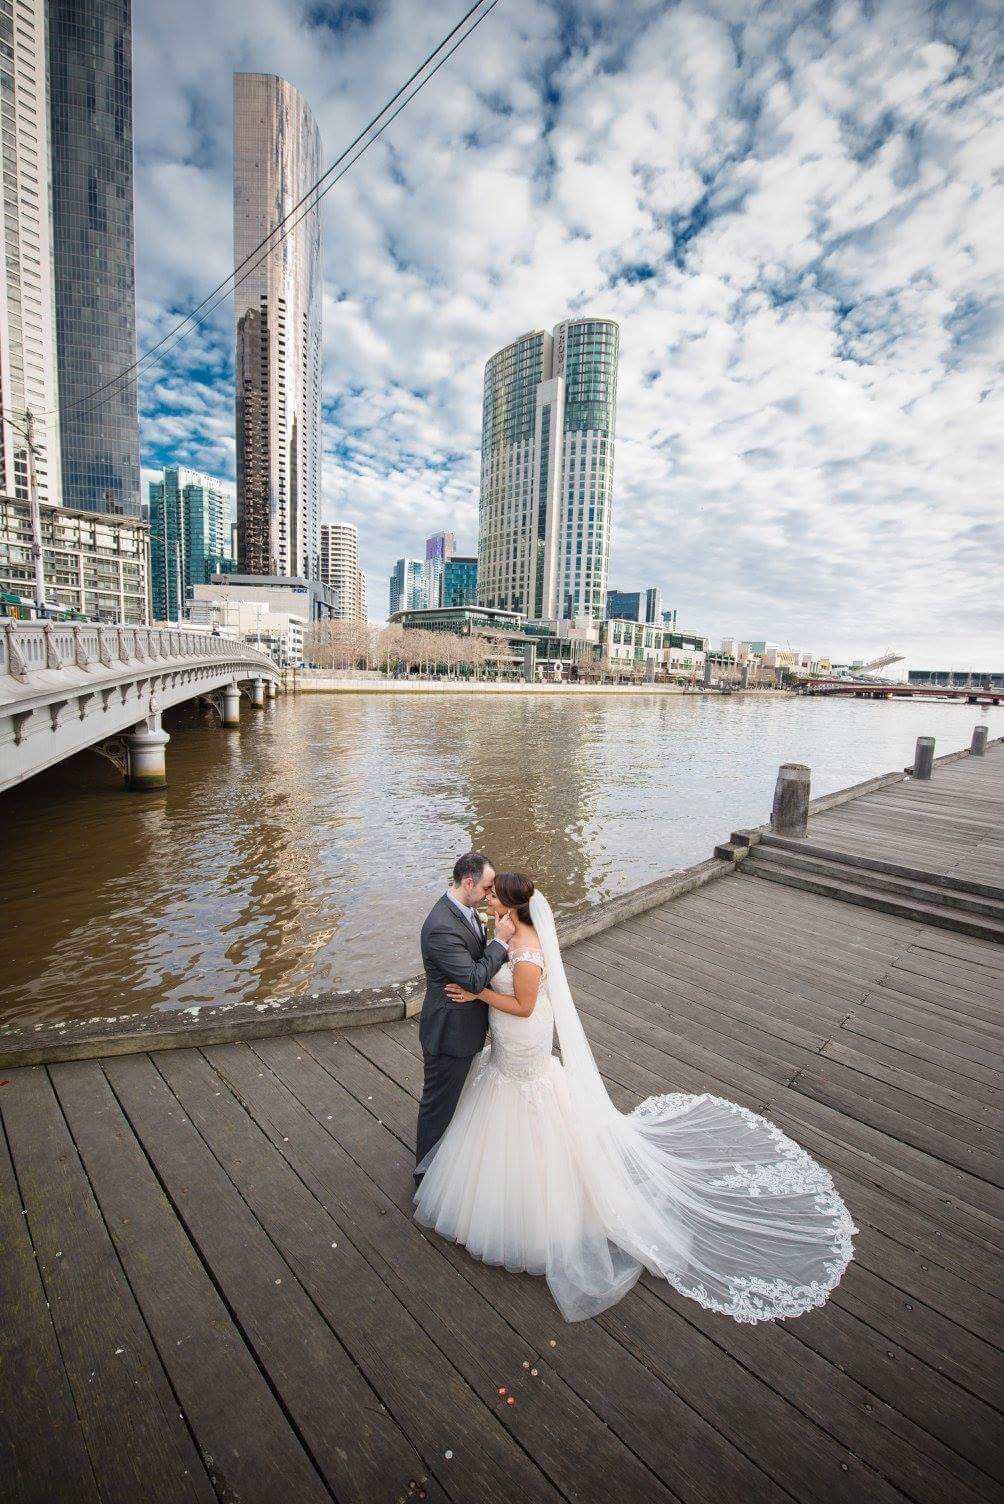 Real bride wears Cassandra wedding dress by Sottero and Midgley by Maggie Sottero in Melbourne, Australia